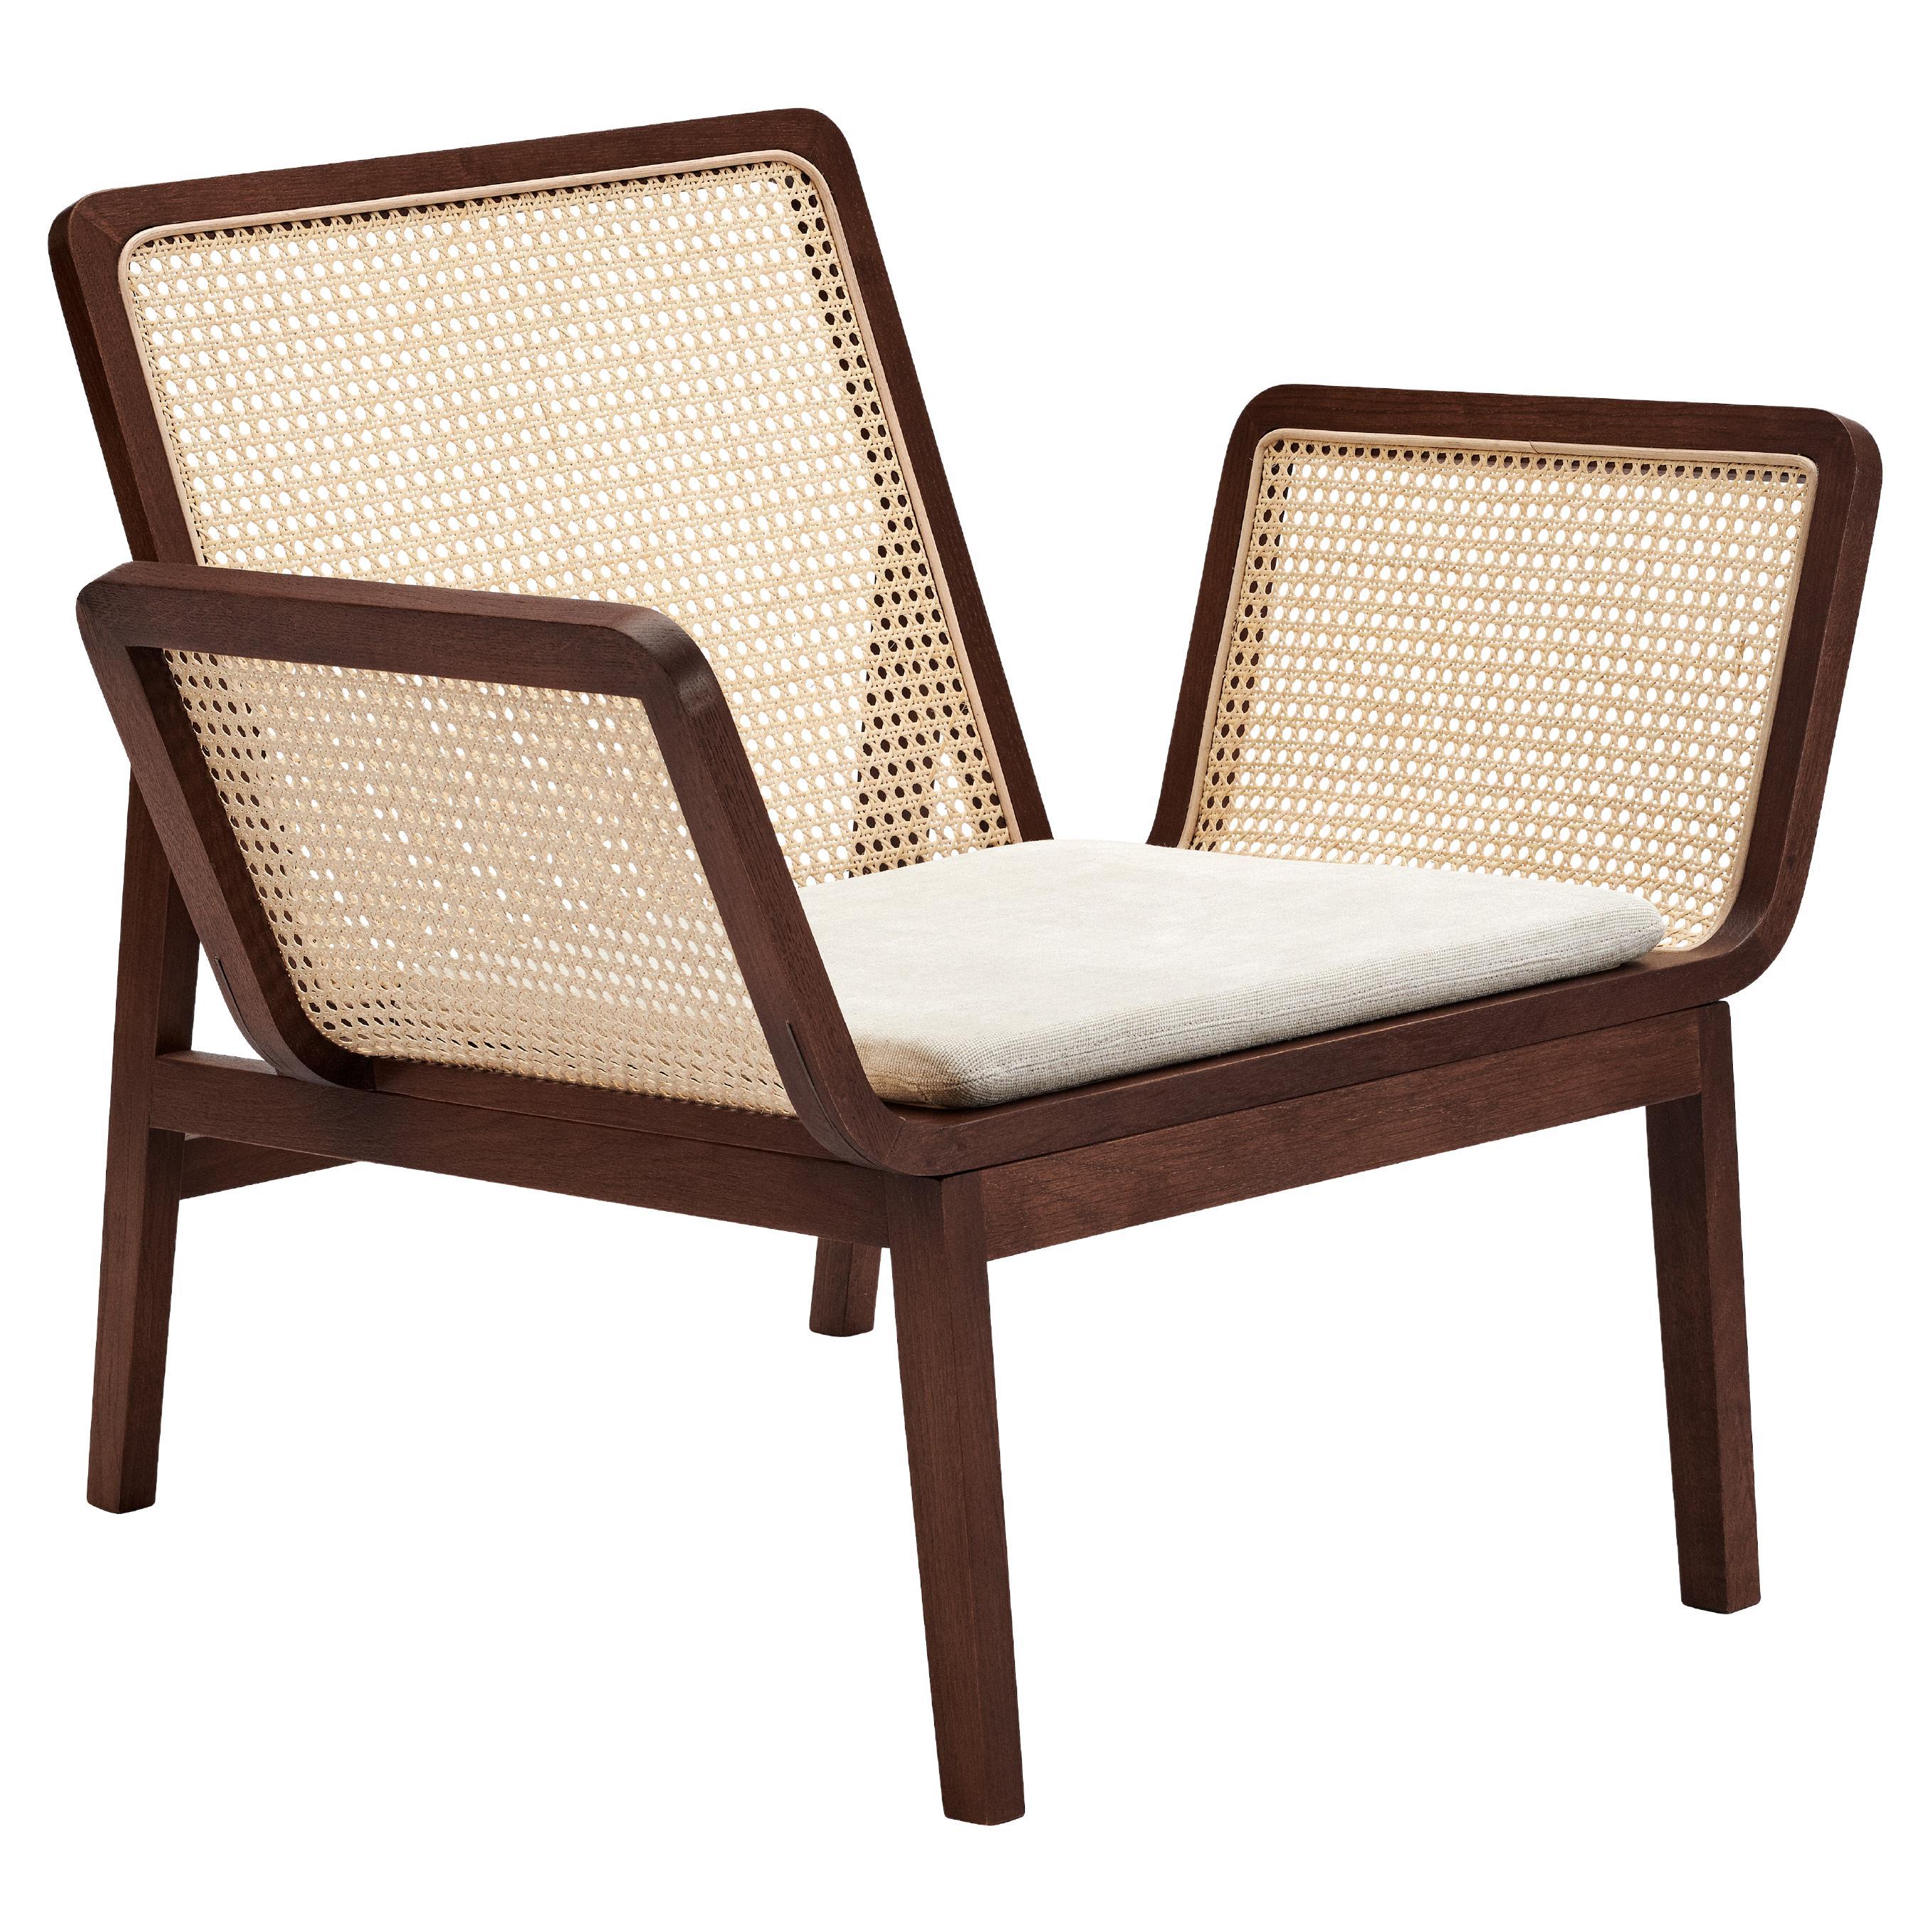 'Le Roi Chair' by Norr11, Smoked Oak and Rattan For Sale